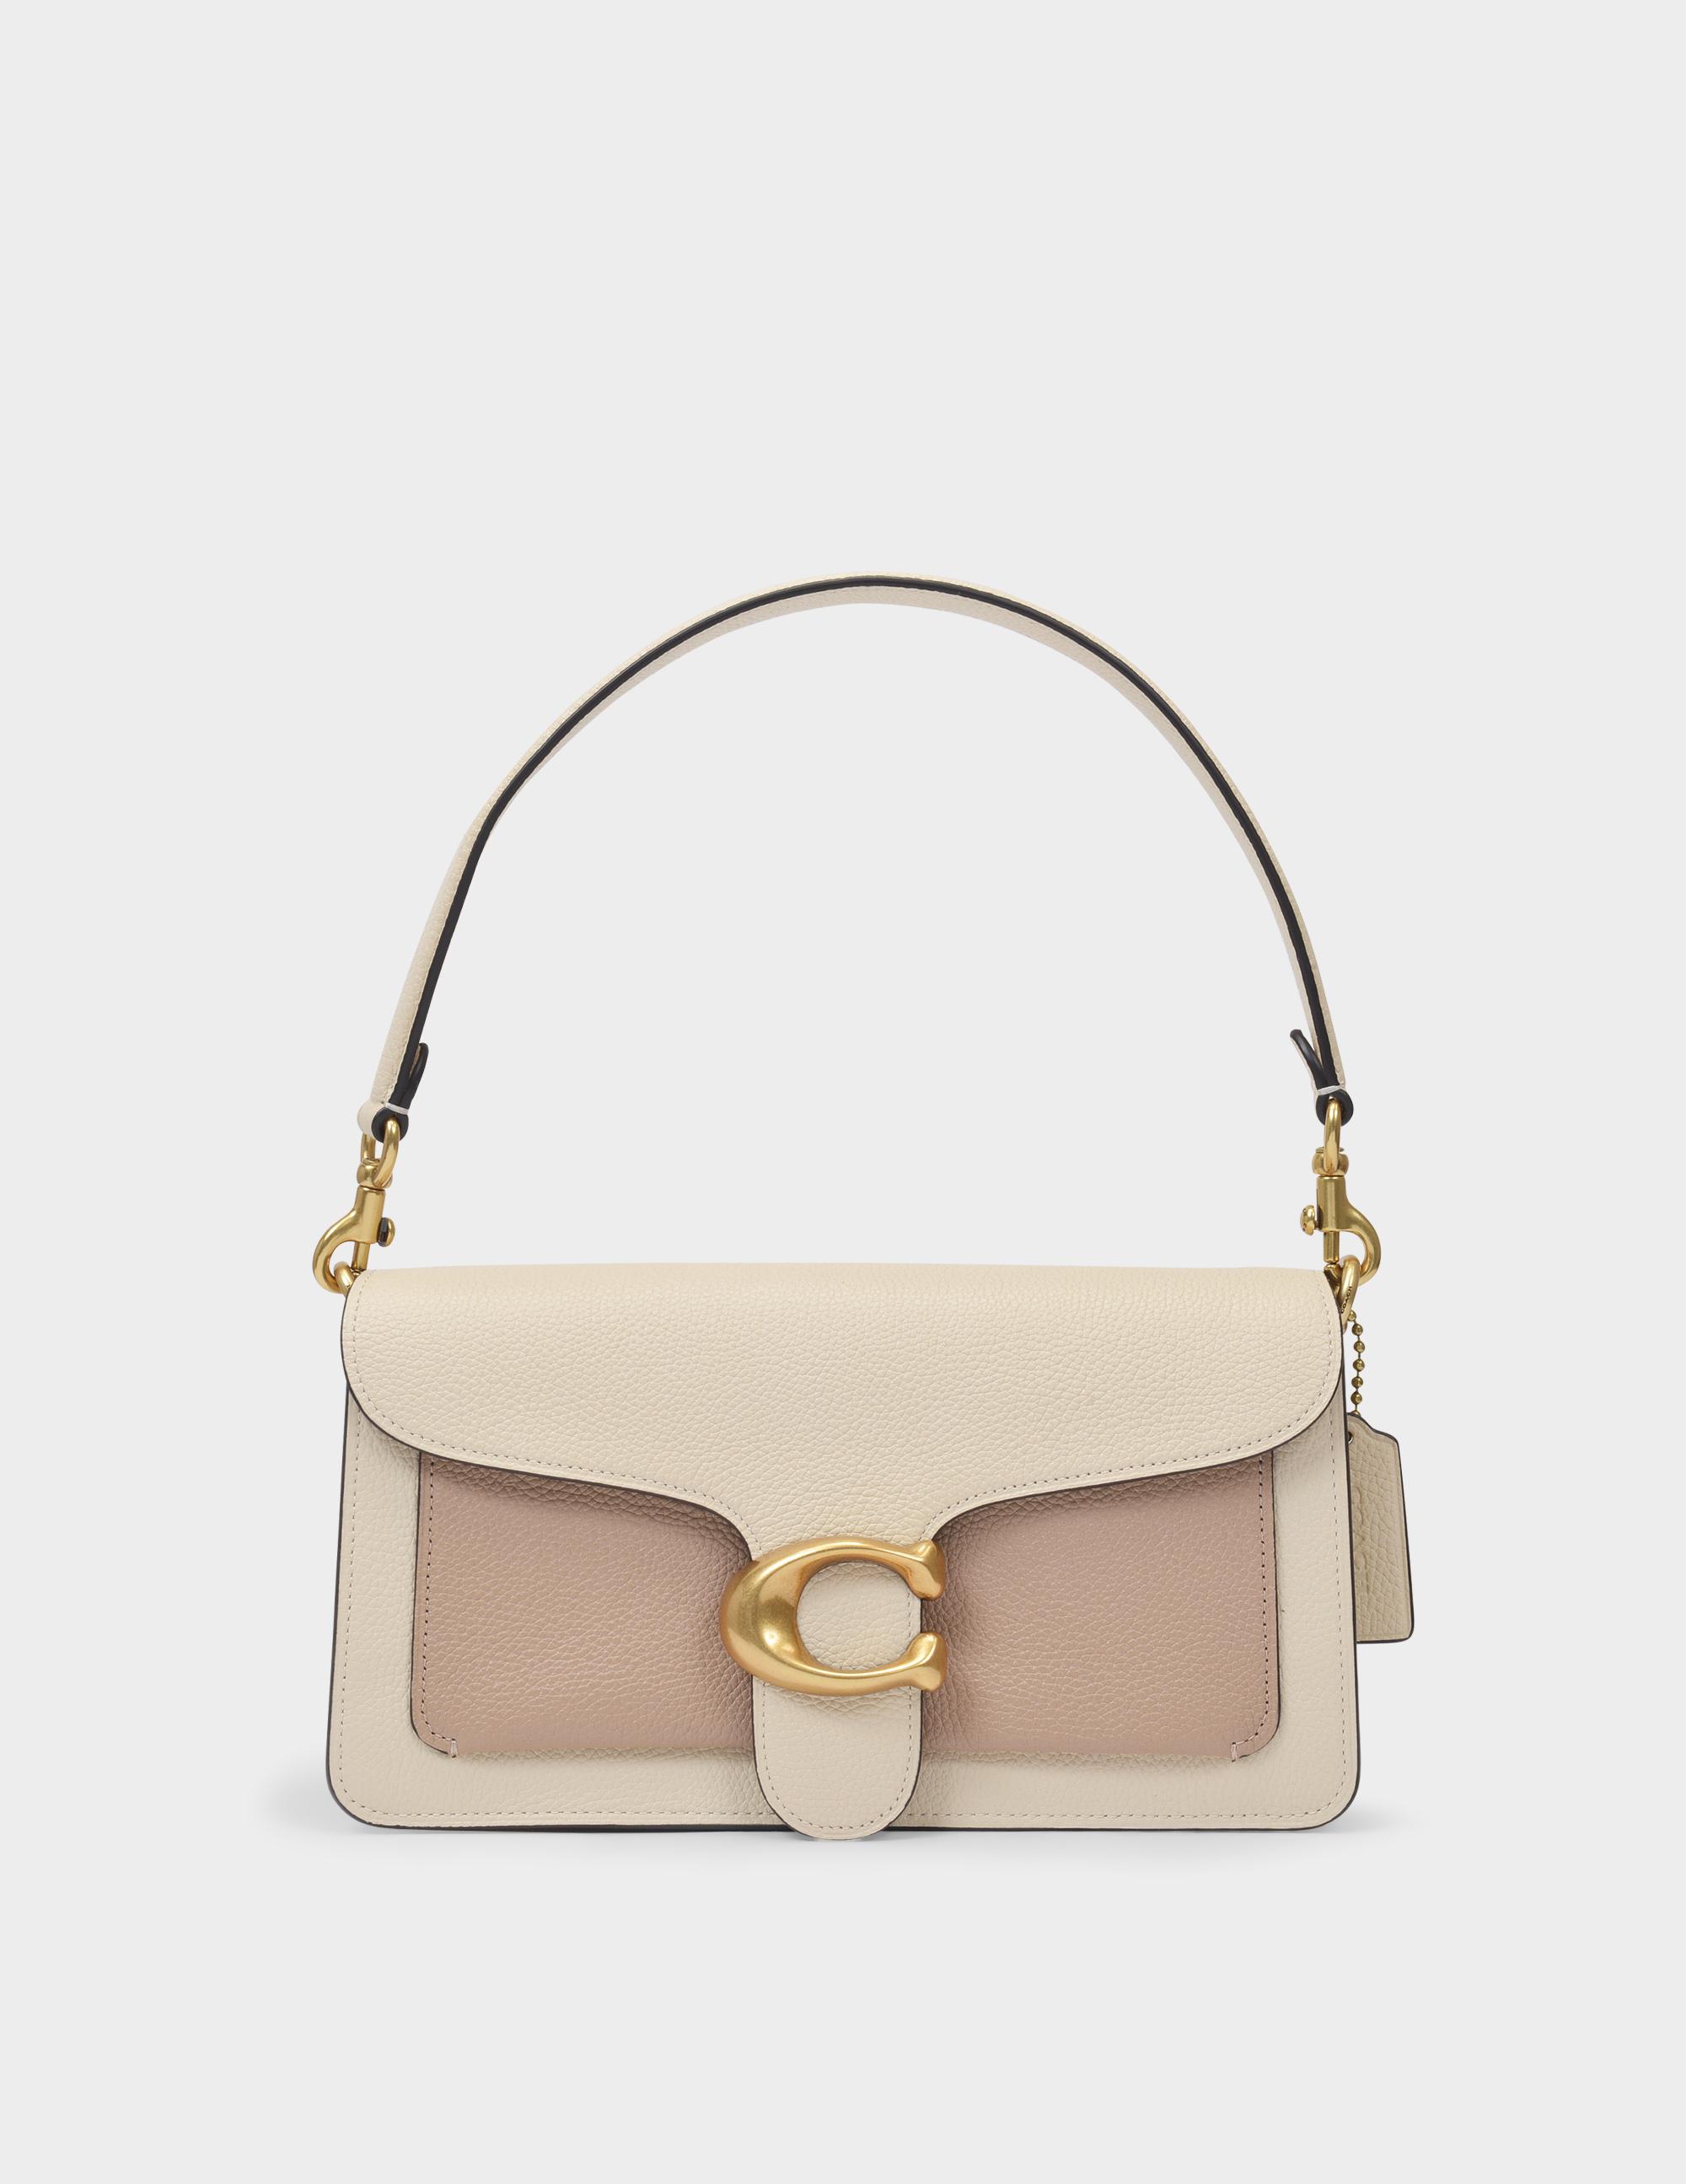 COACH Tabby 26 Bag In Ivory Taupe Multi-leather in Natural | Lyst